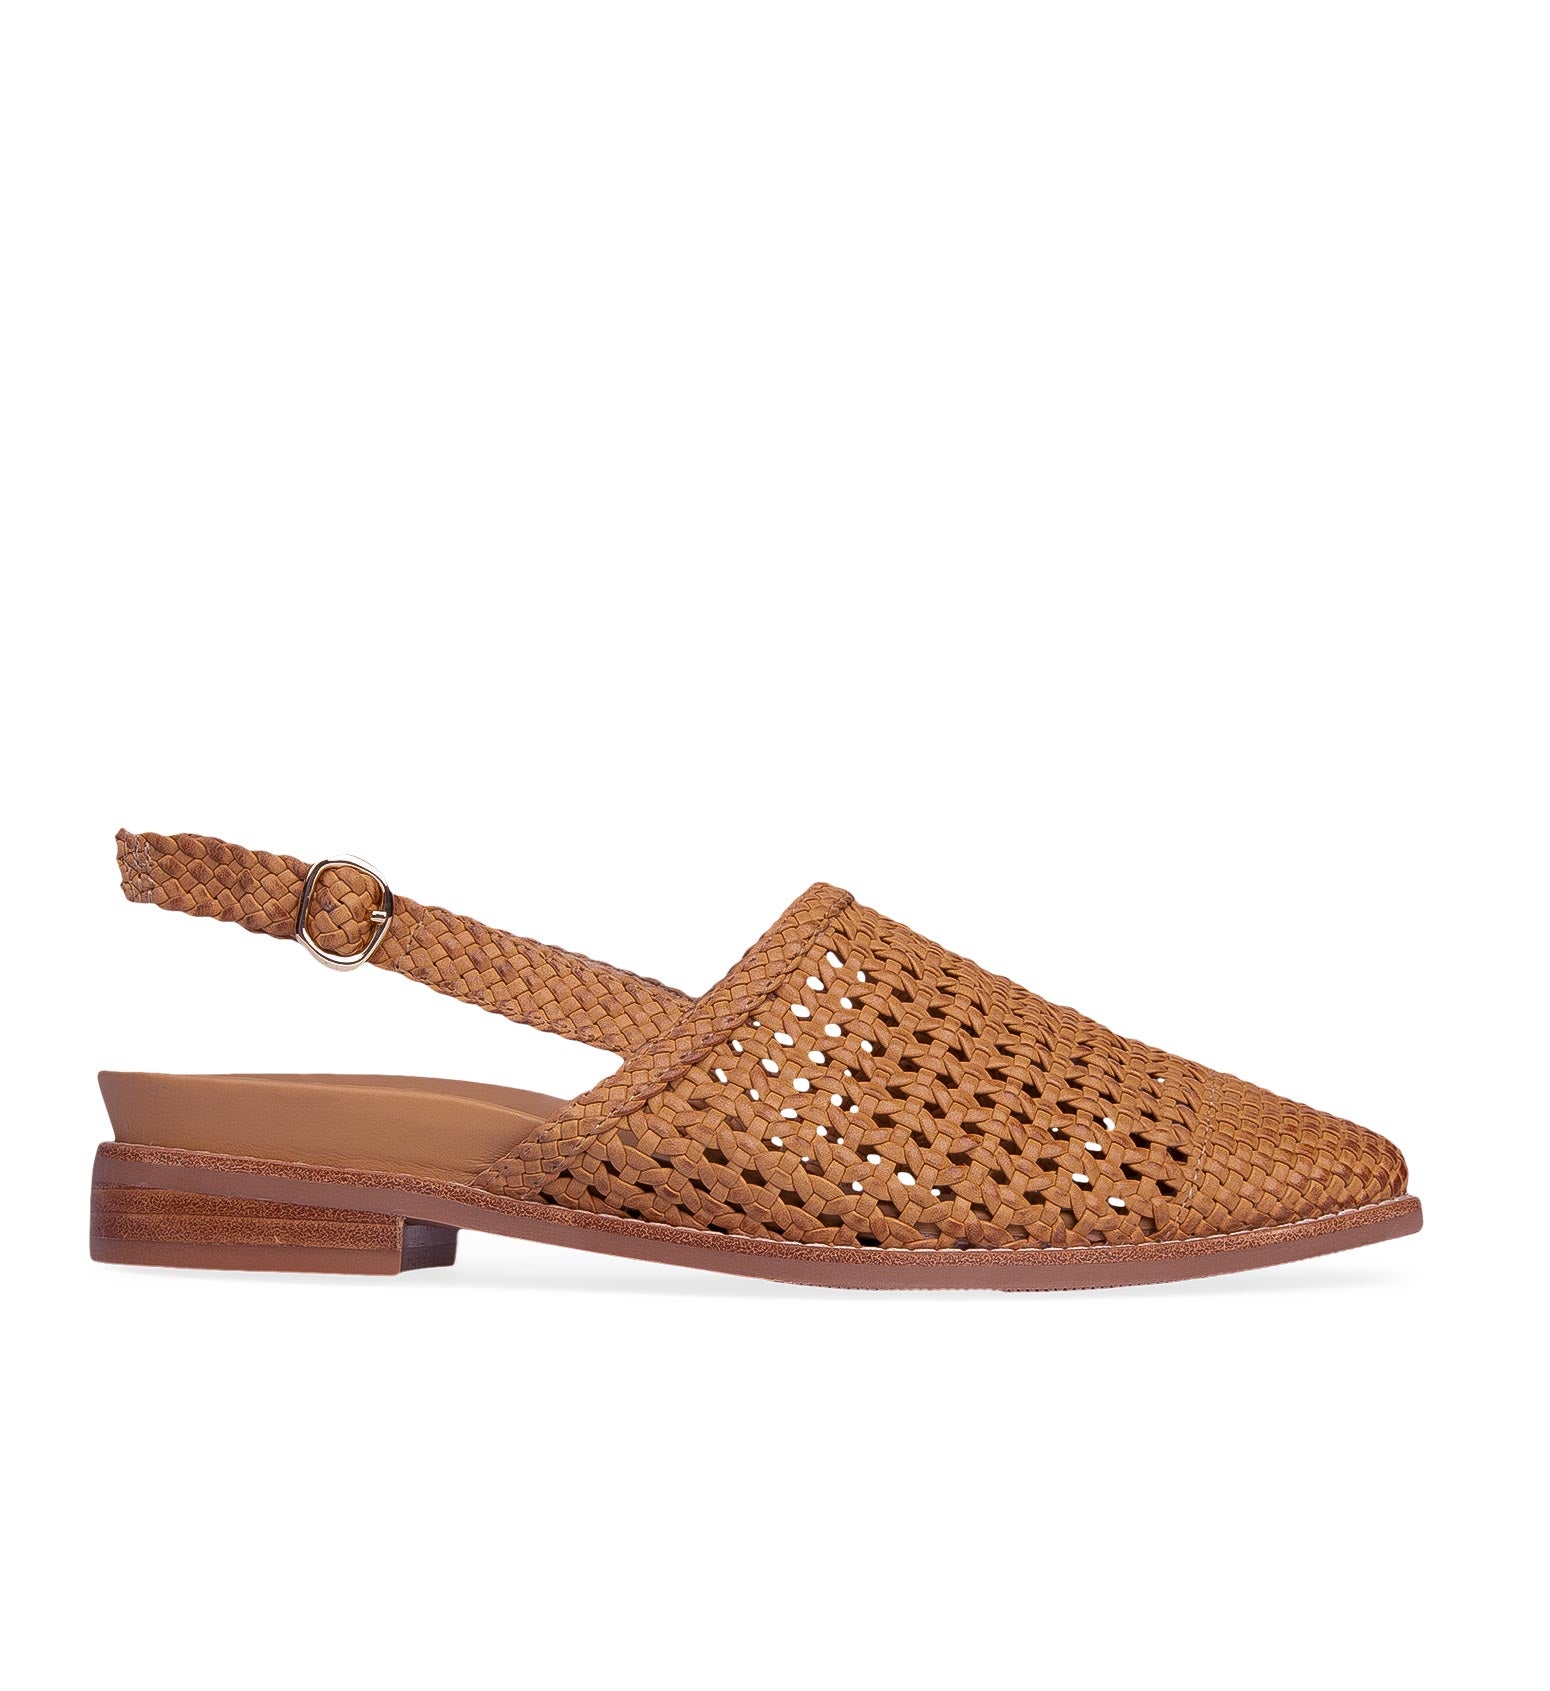 Chickadee Tan Leather Woven Sandals | Bared Footwear